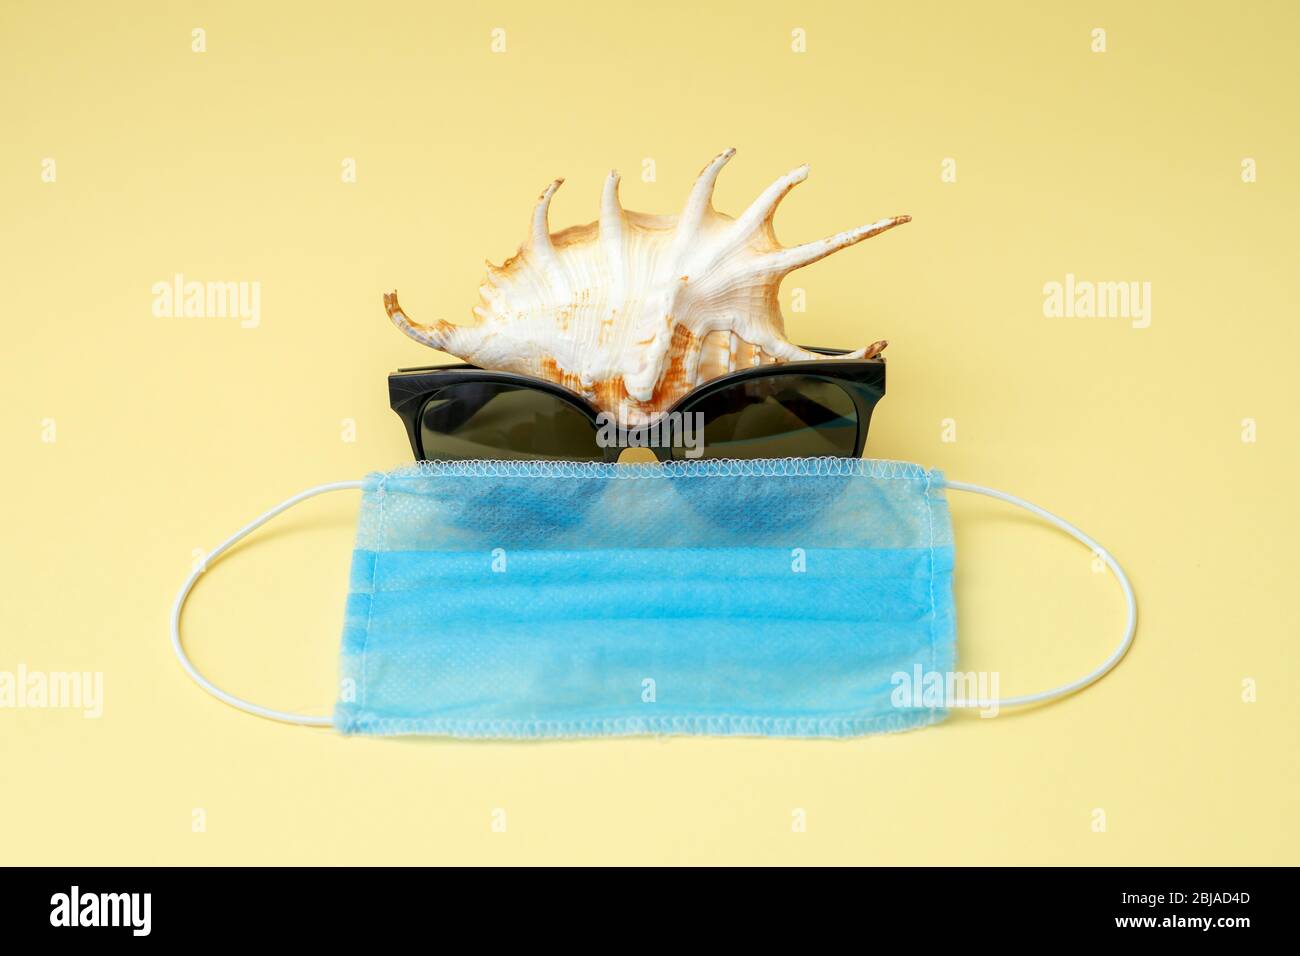 Seashell wearing sunglasses and medical mask on yellow background. Coronavirus or COVID-19 during traveling concept. Stock Photo